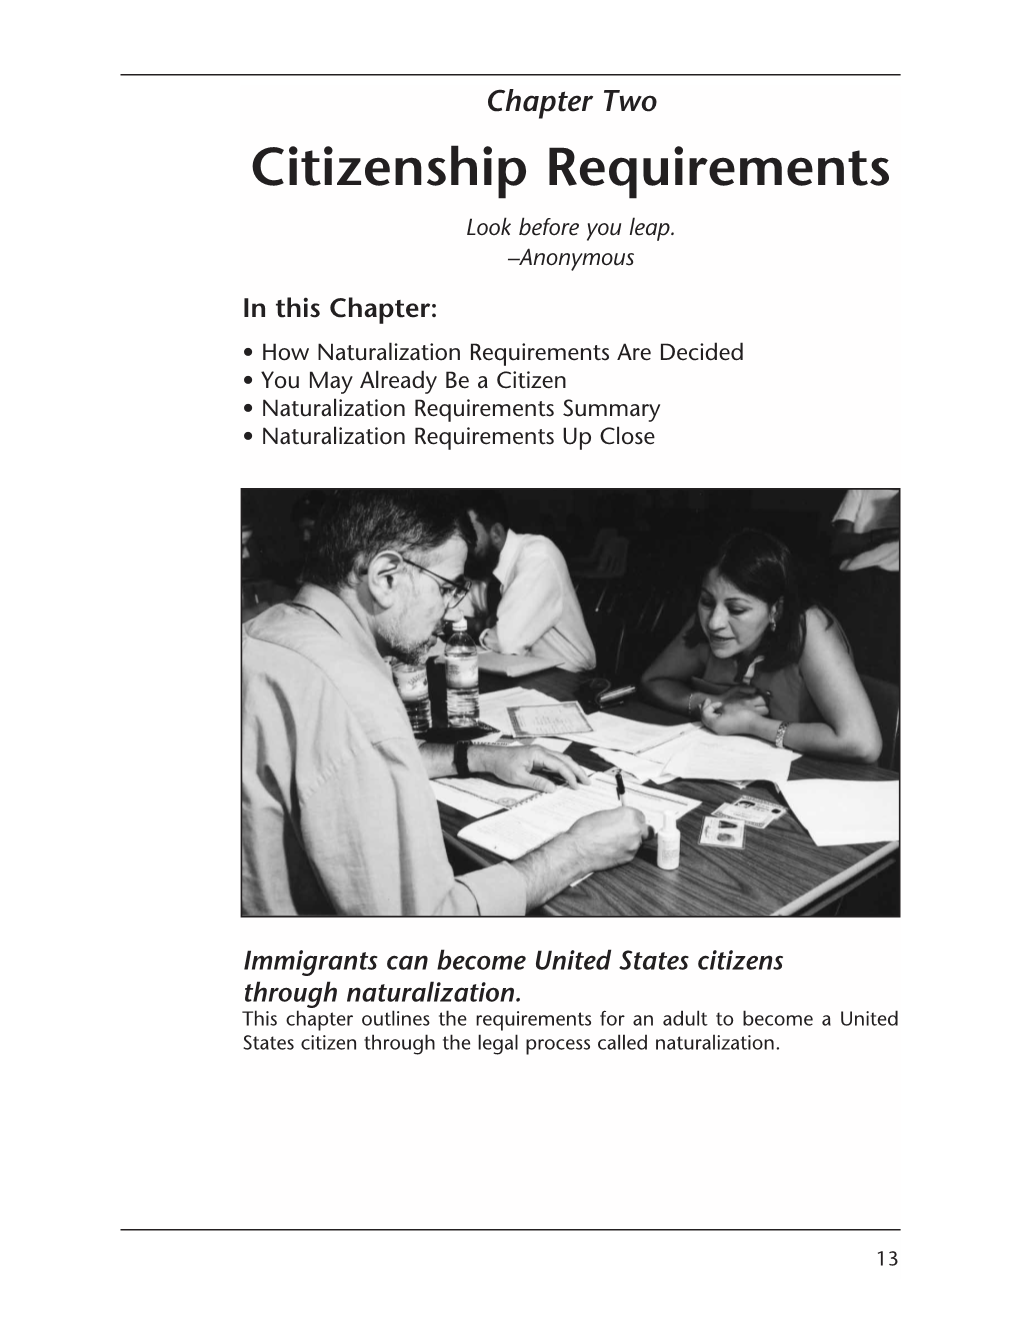 Citizenship Requirements Look Before You Leap